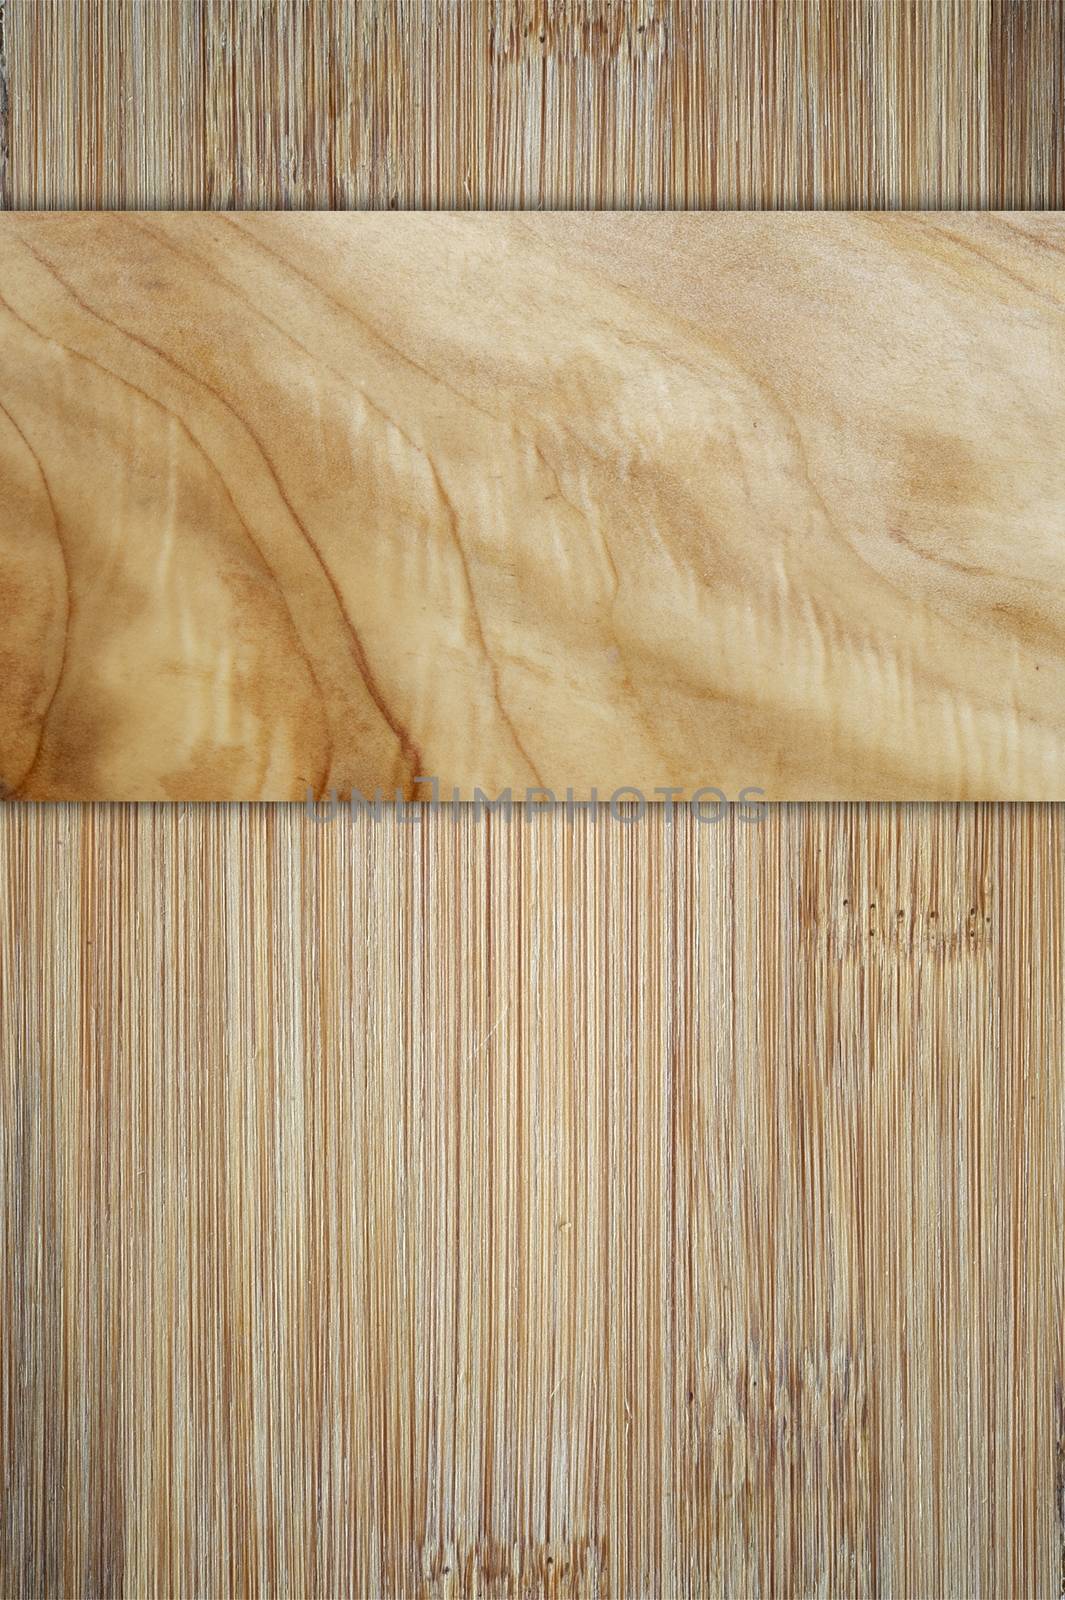 Wood Design Background by welcomia